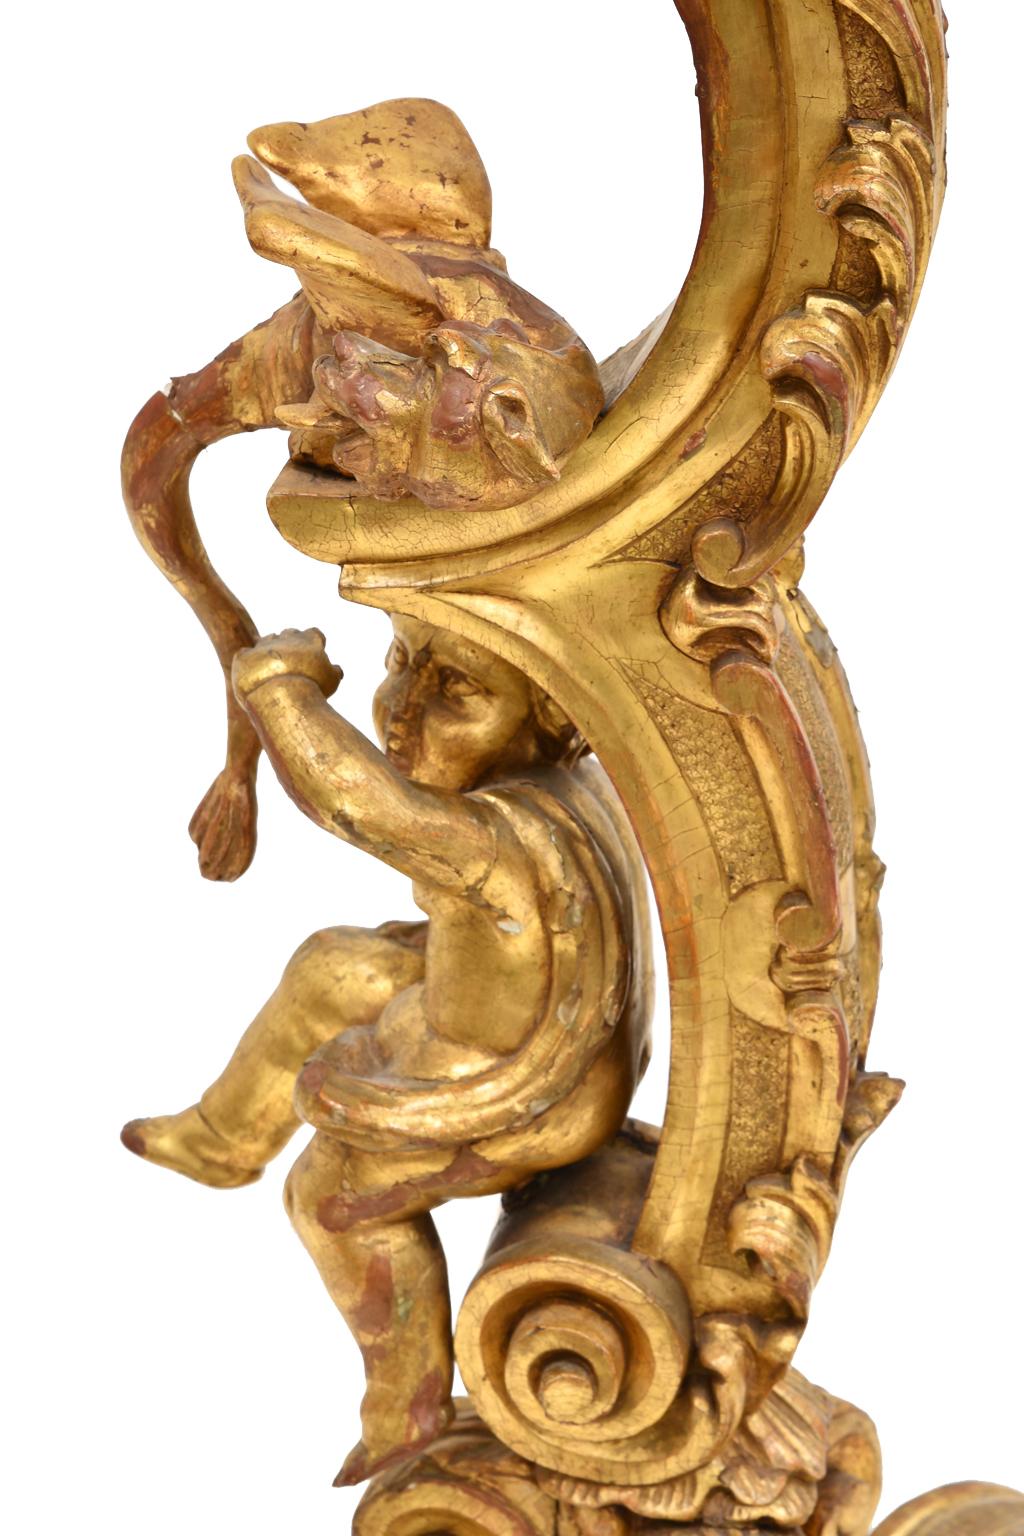 Hand-Carved Antique Venetian Trespolo Pedestal Stand in Gilded Wood w/ Carved Dragon & Putto